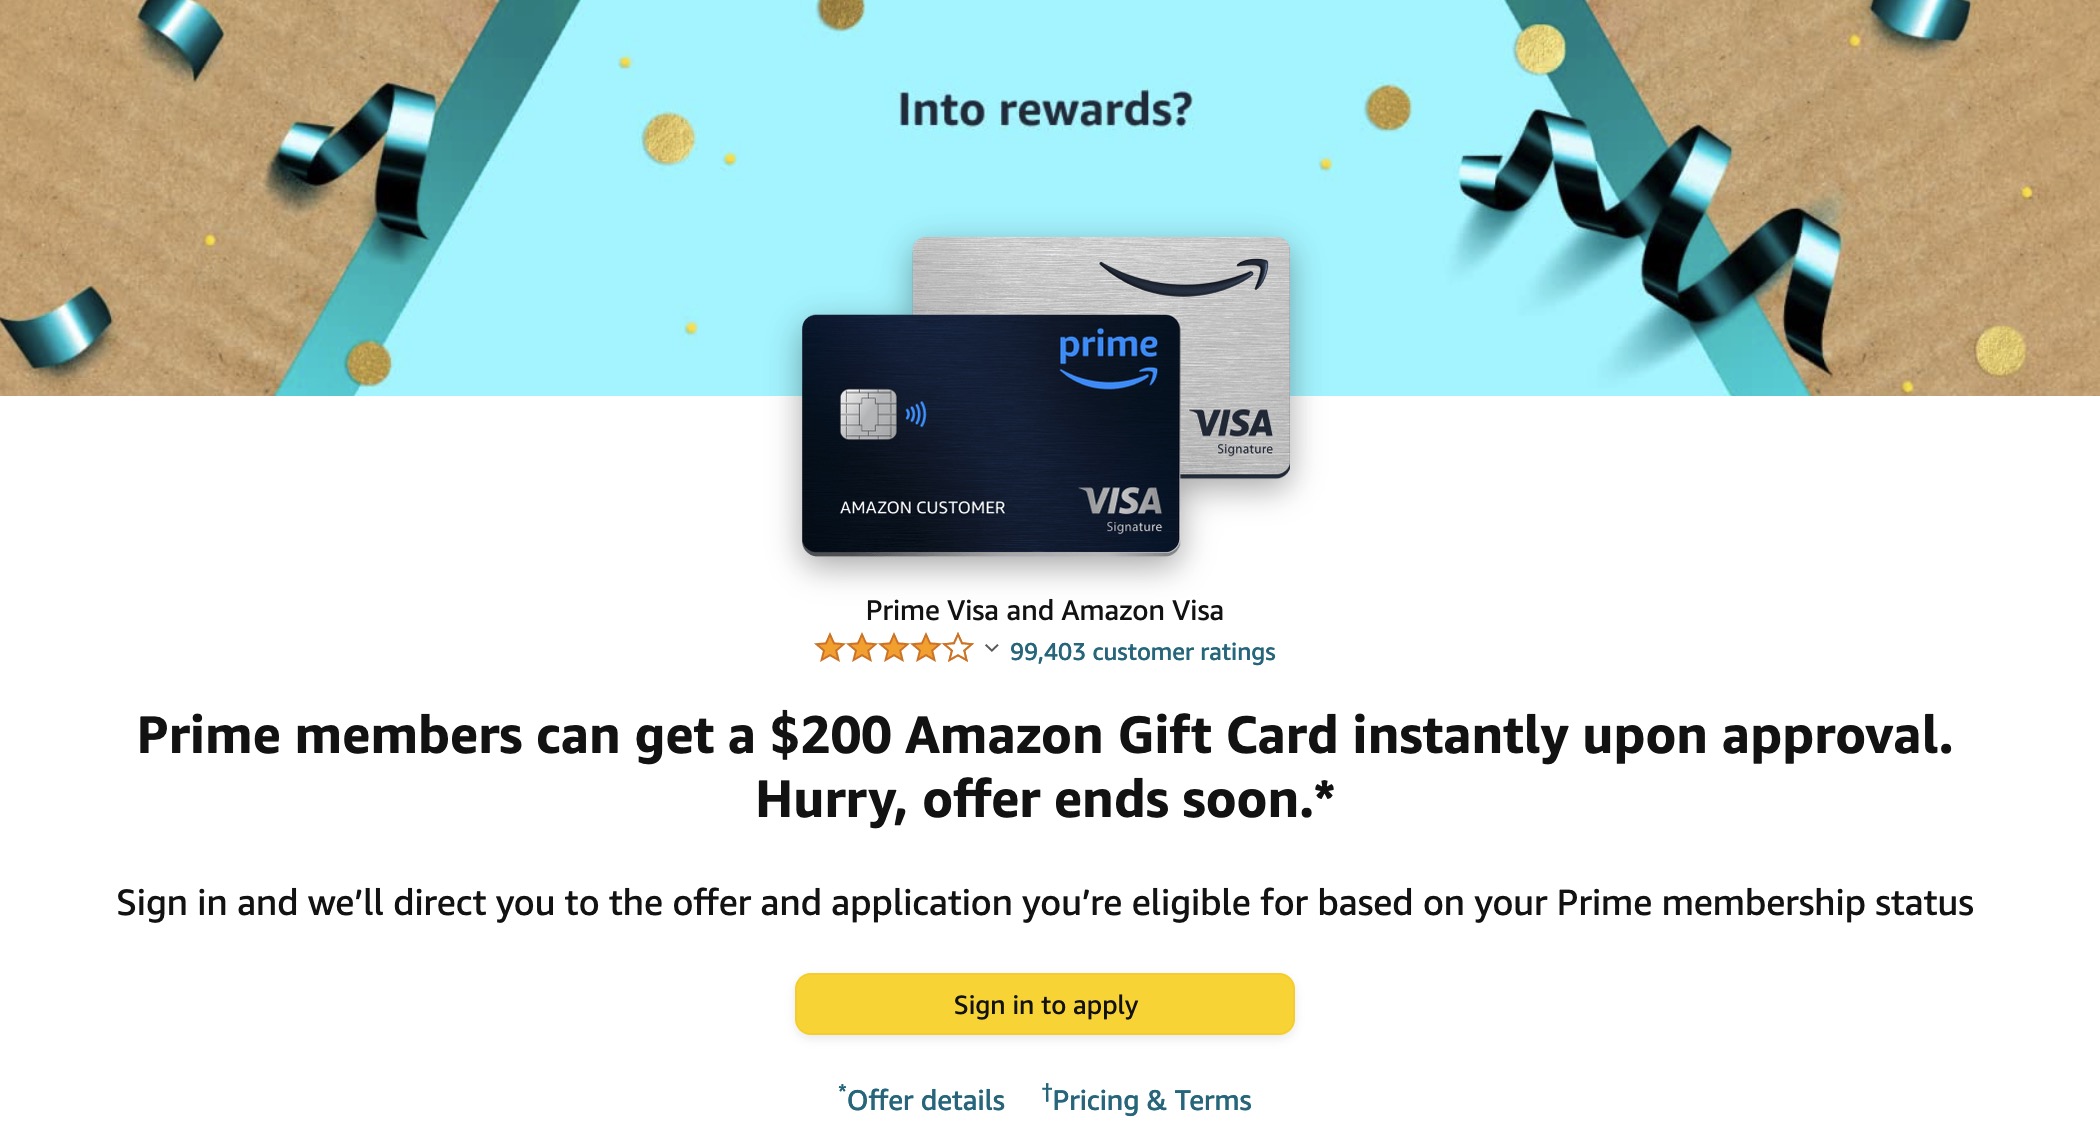 I returned a item and it did not refund my card. Went here instead why is  that? Can I send it over? : r/amazonprime